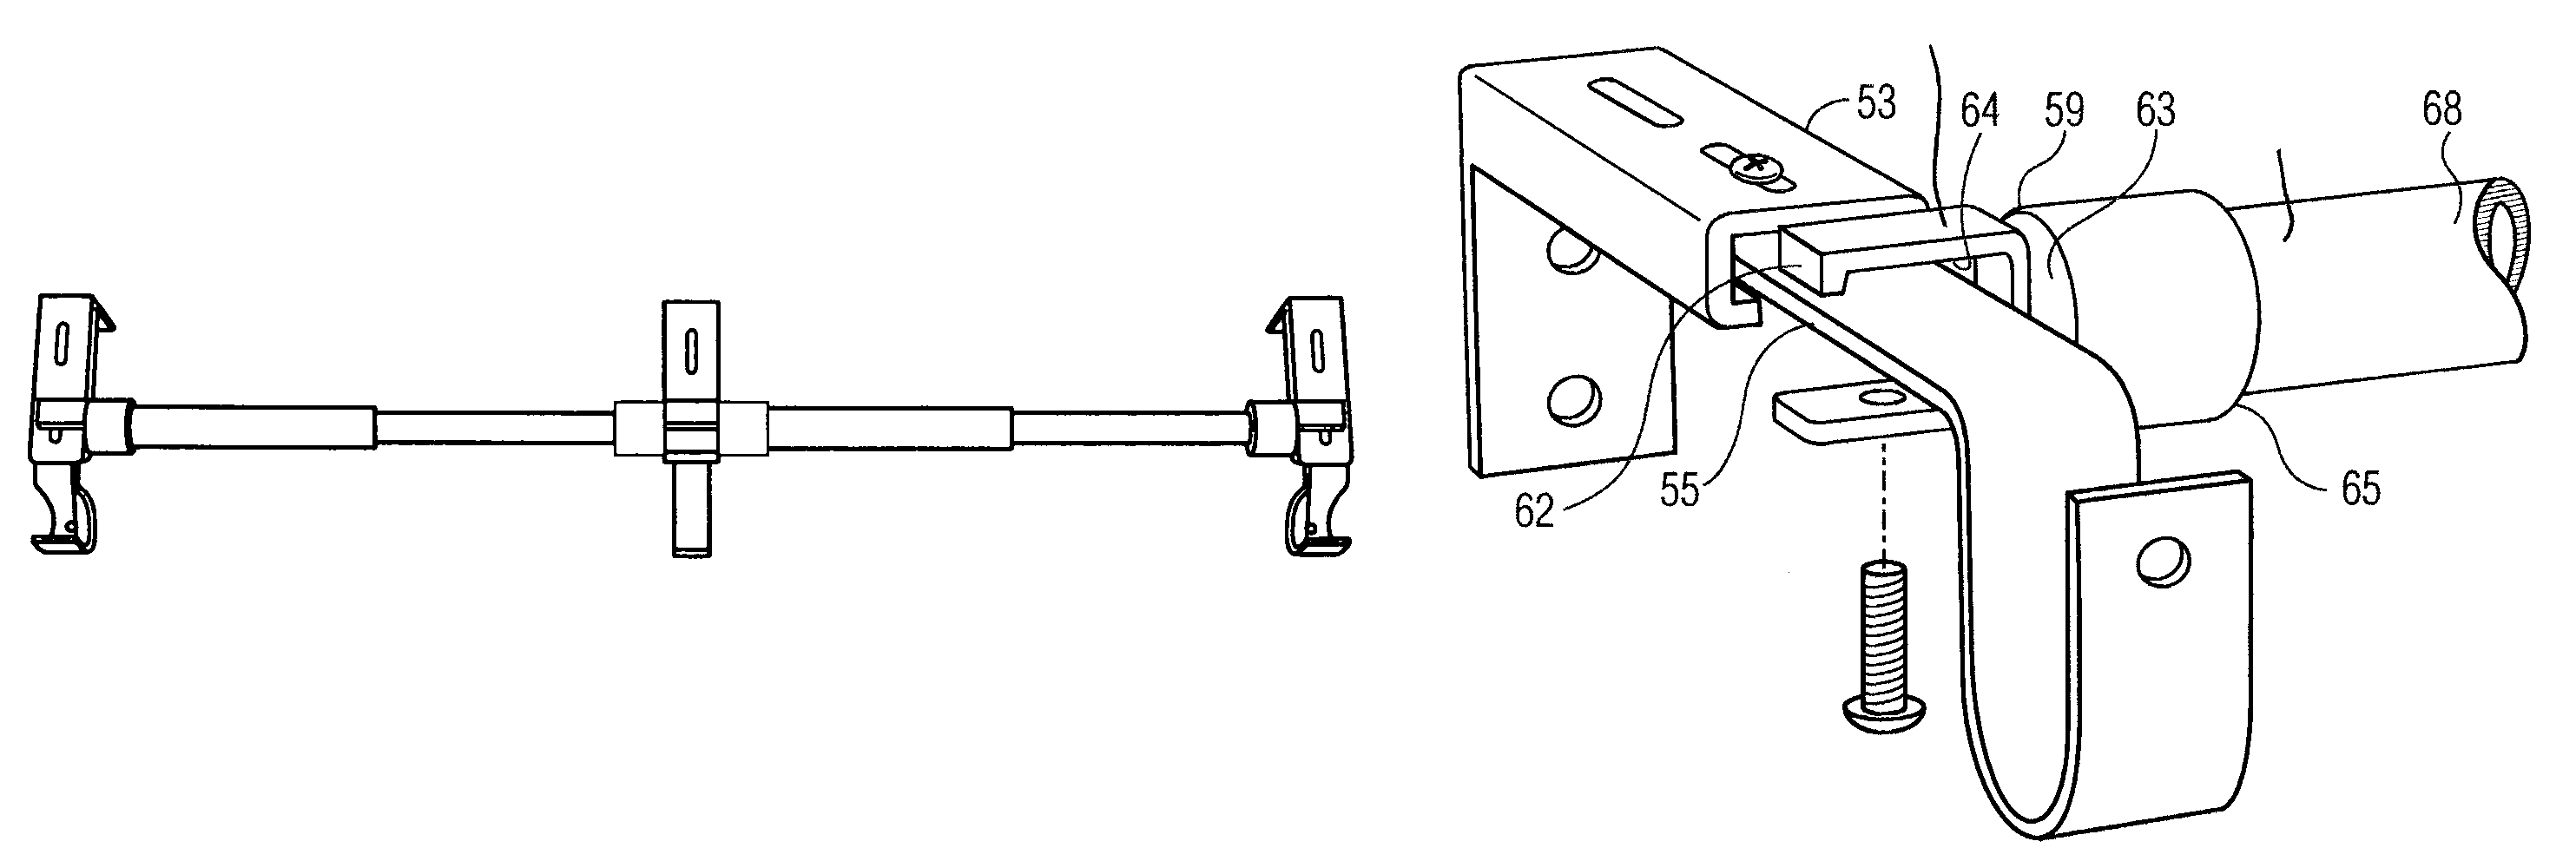 Apparatus and method for hanging supplemental sets of curtains